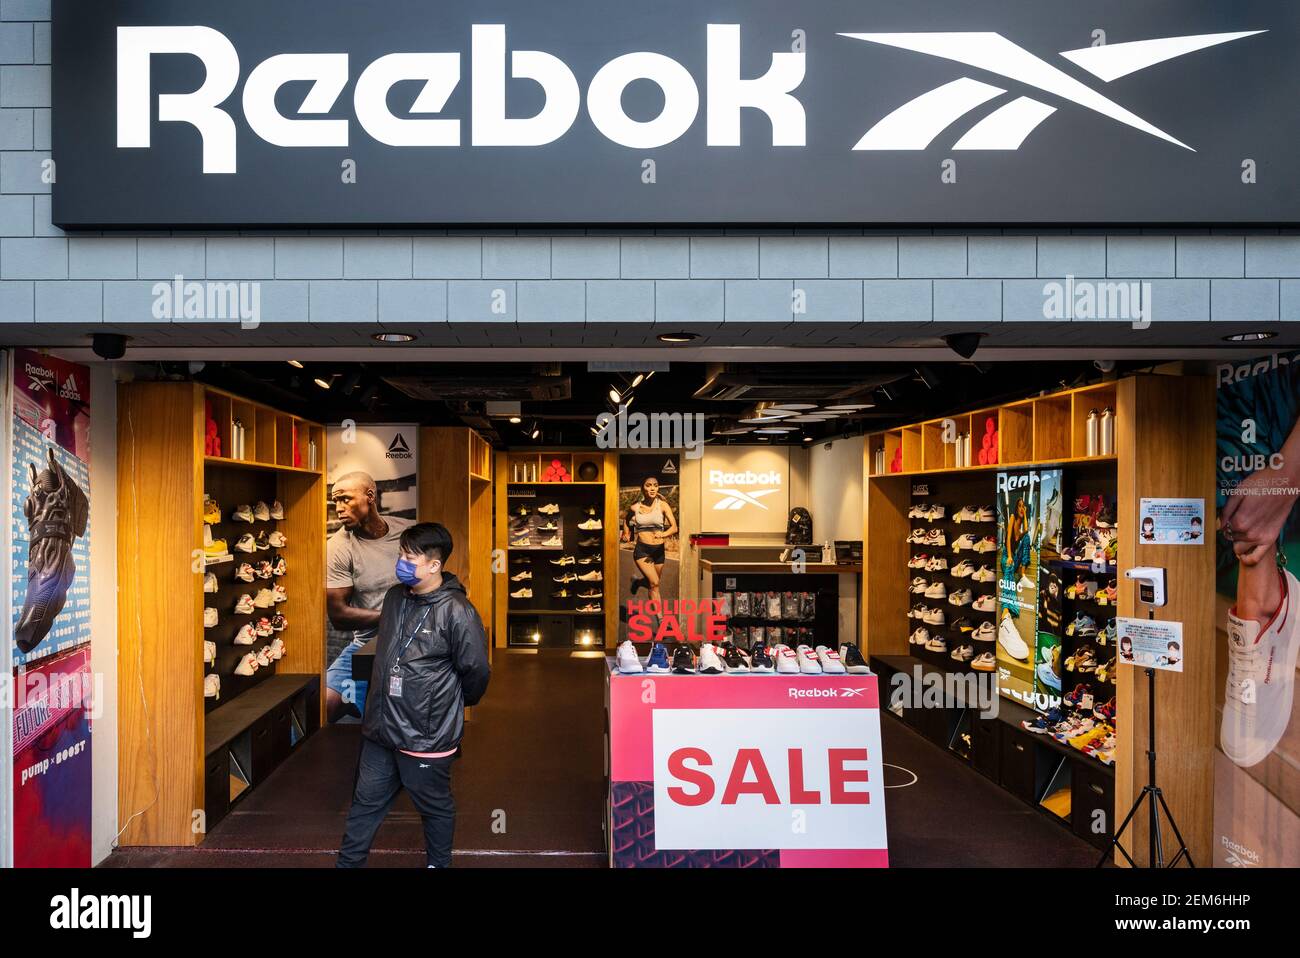 Page 2 - Reebok Brand High Resolution Stock Photography and Images - Alamy